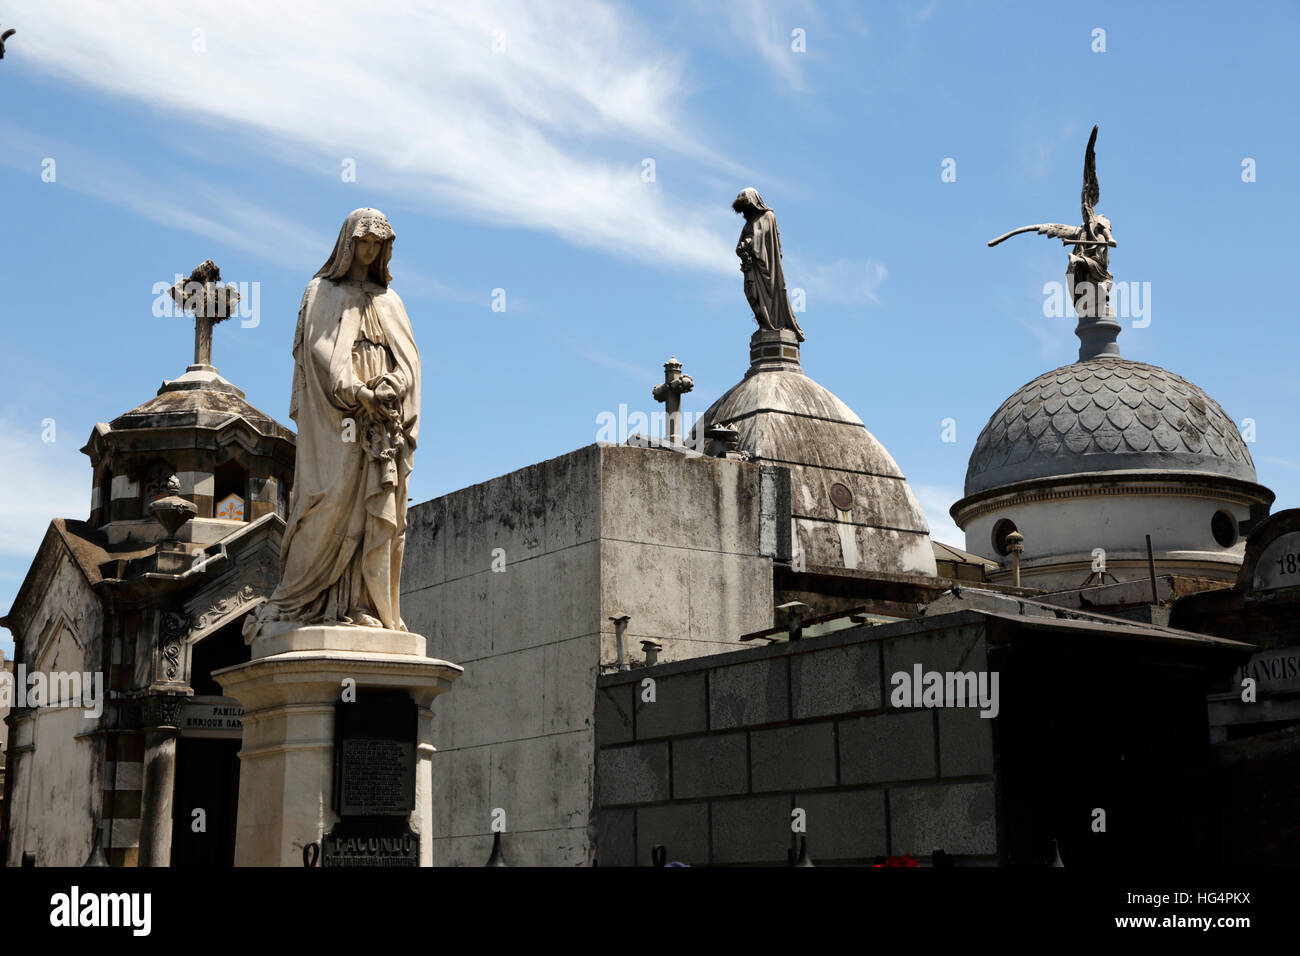 Stone angels on roofs of family mausoleums in the Cementerio de la Recoleta, Buenos Aires, Argentina, South America Stock Photo